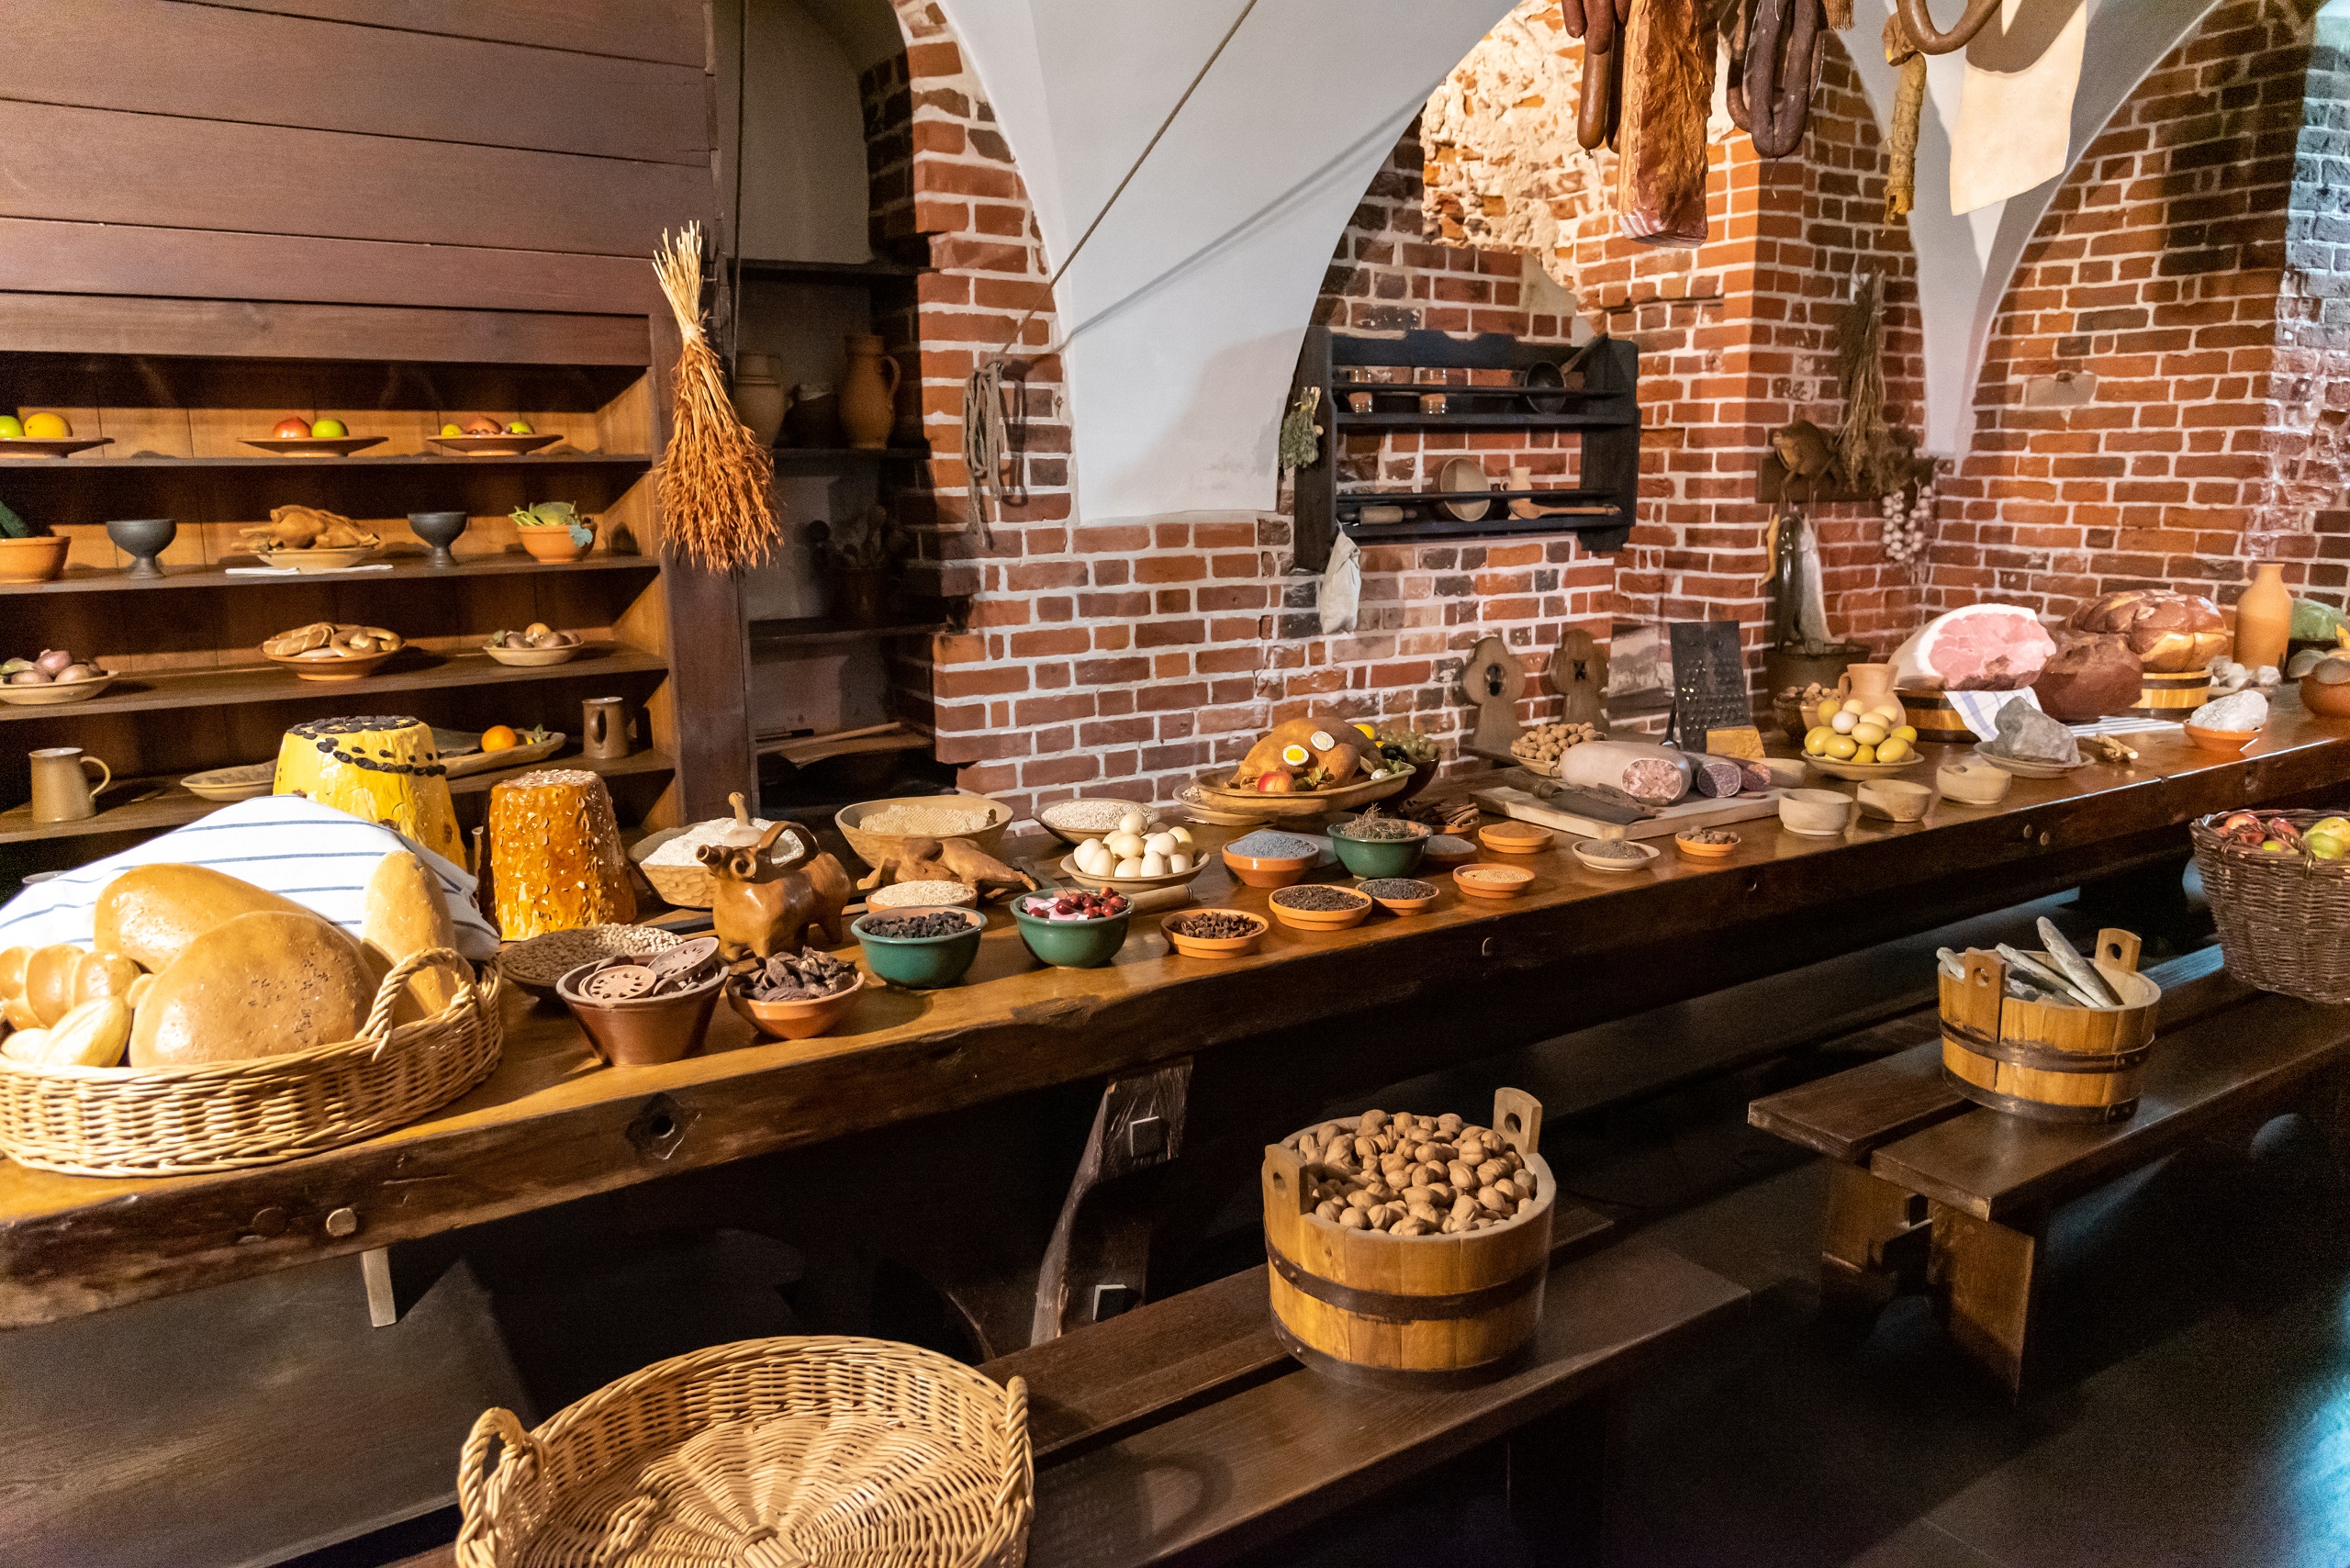 A feast of Polish food laid out on a rustic long table in an old style kitchen in a 13 century Castle of the Teutonic Order near Malbork, Poland.